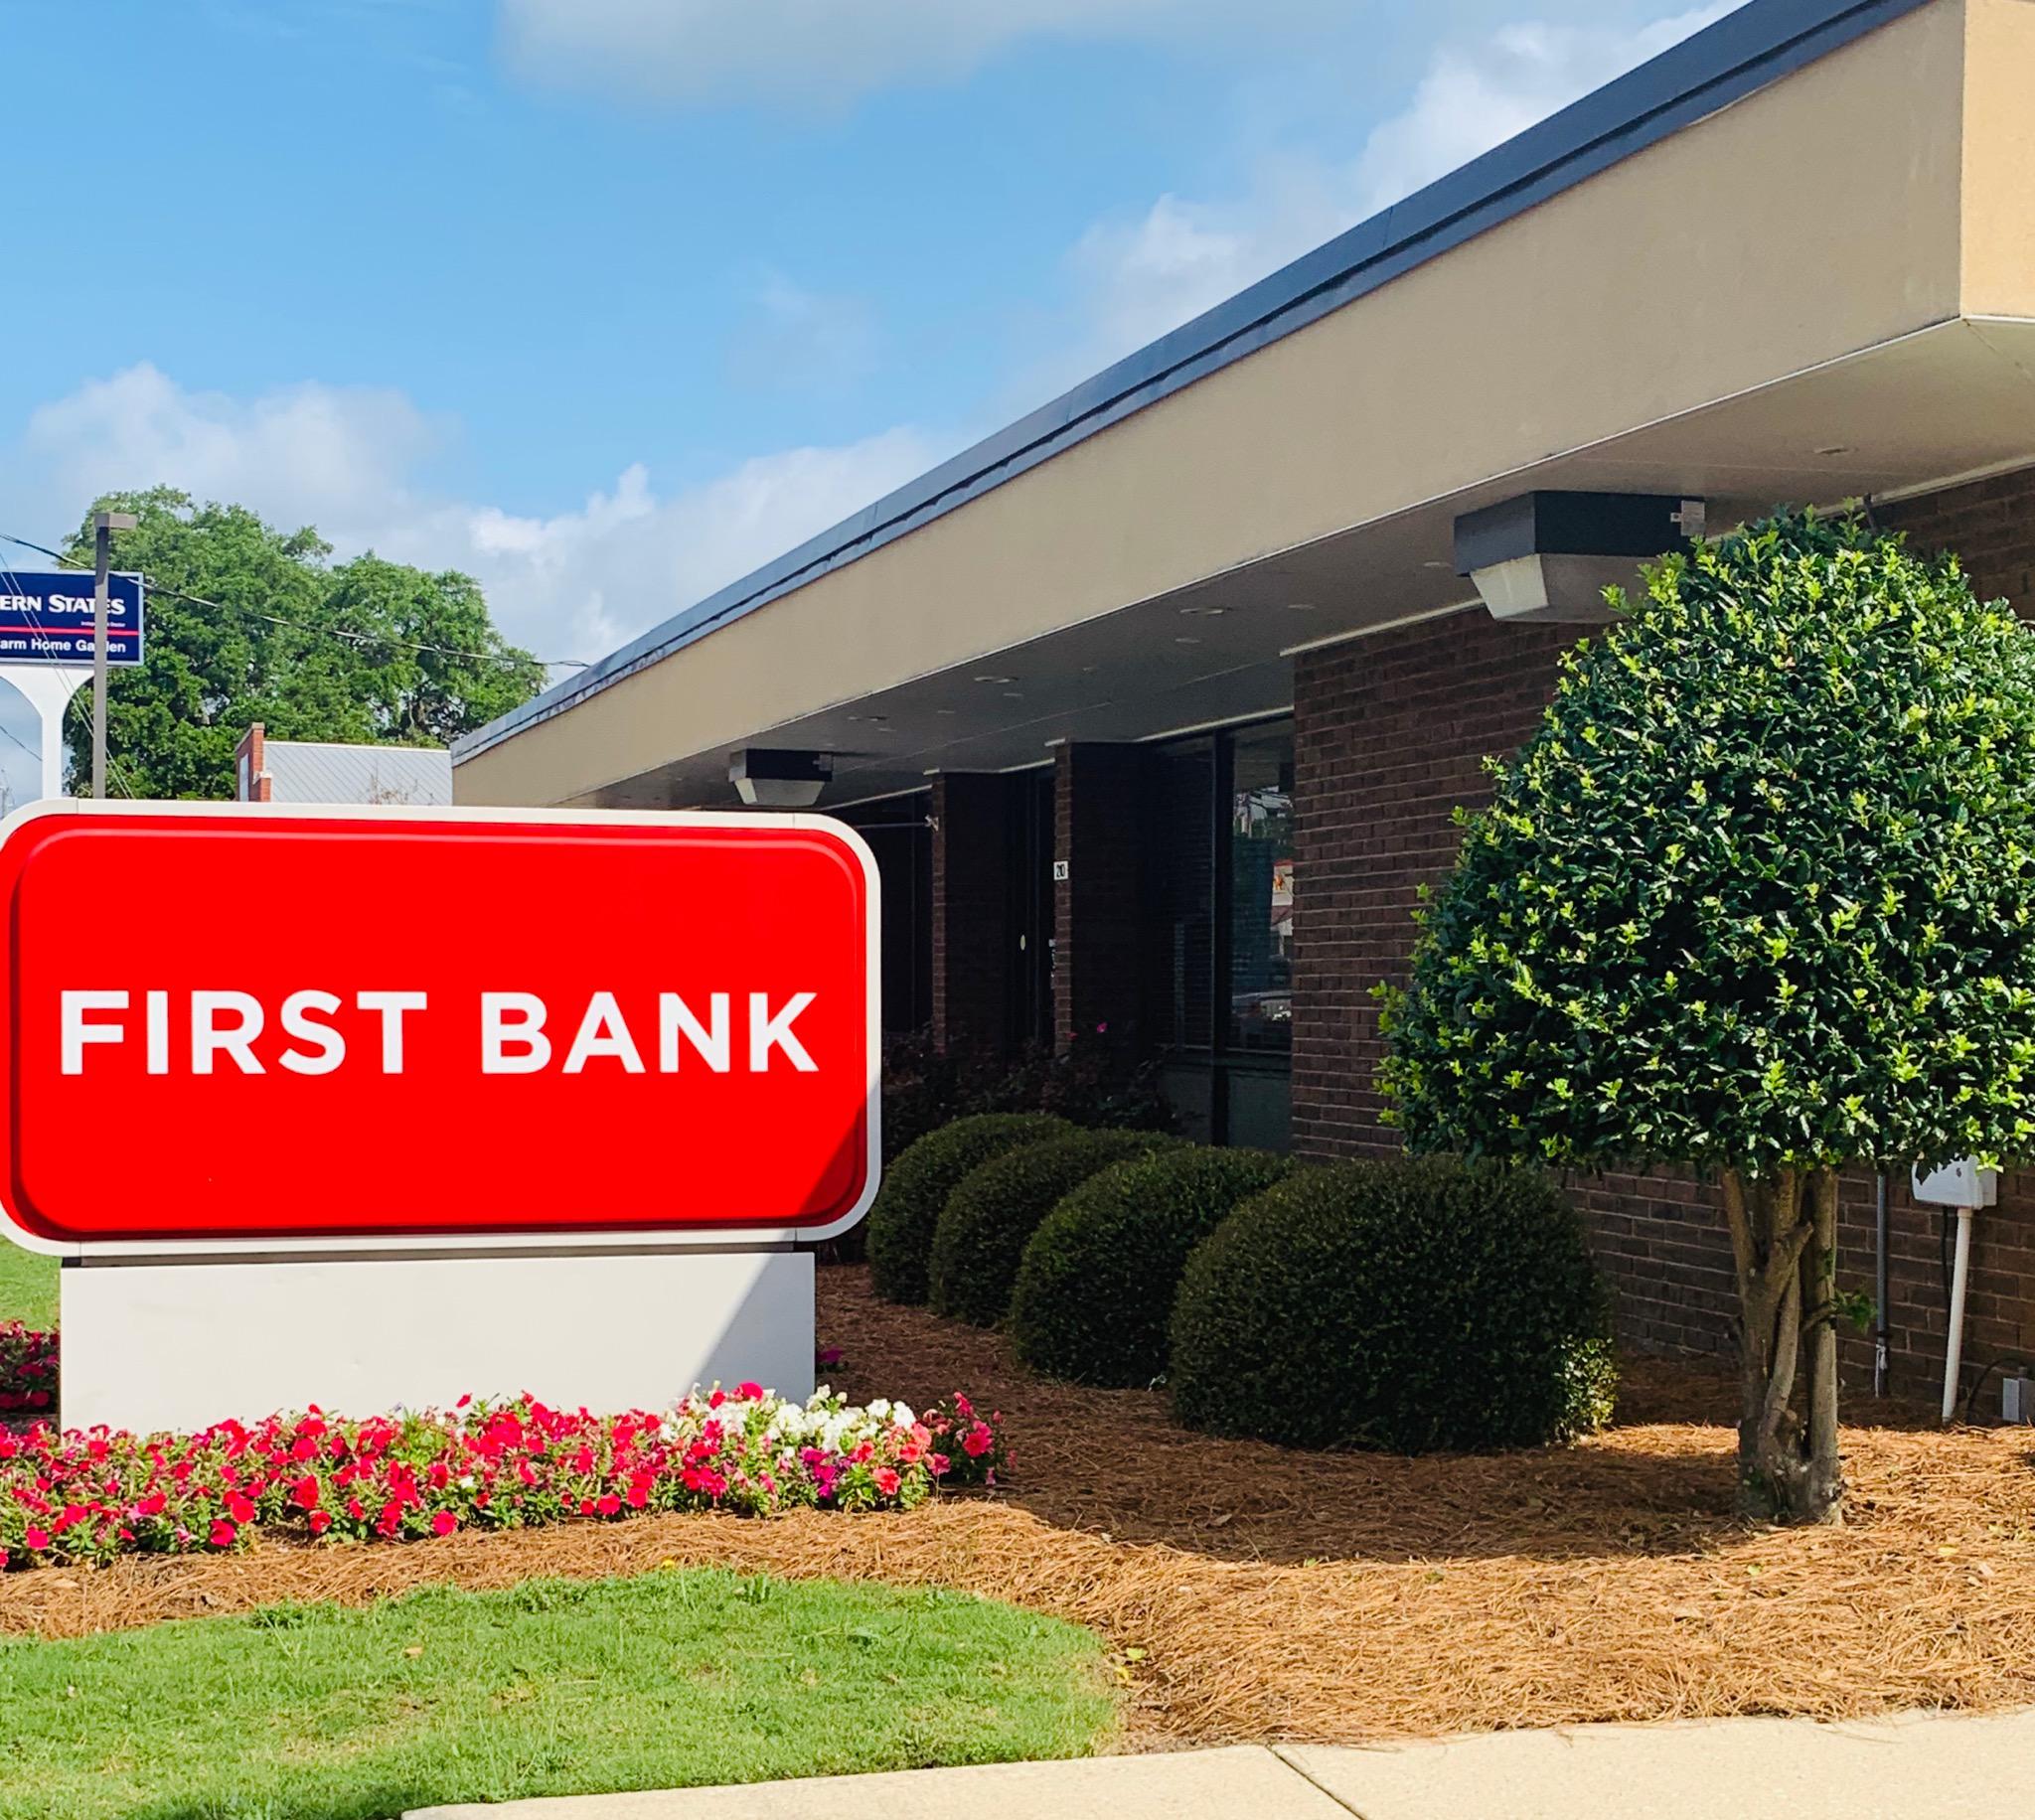 Come visit the First Bank Pembroke branch. Your local team will provide expert financial advice, flexible rates, business solutions, and convenient mobile options.